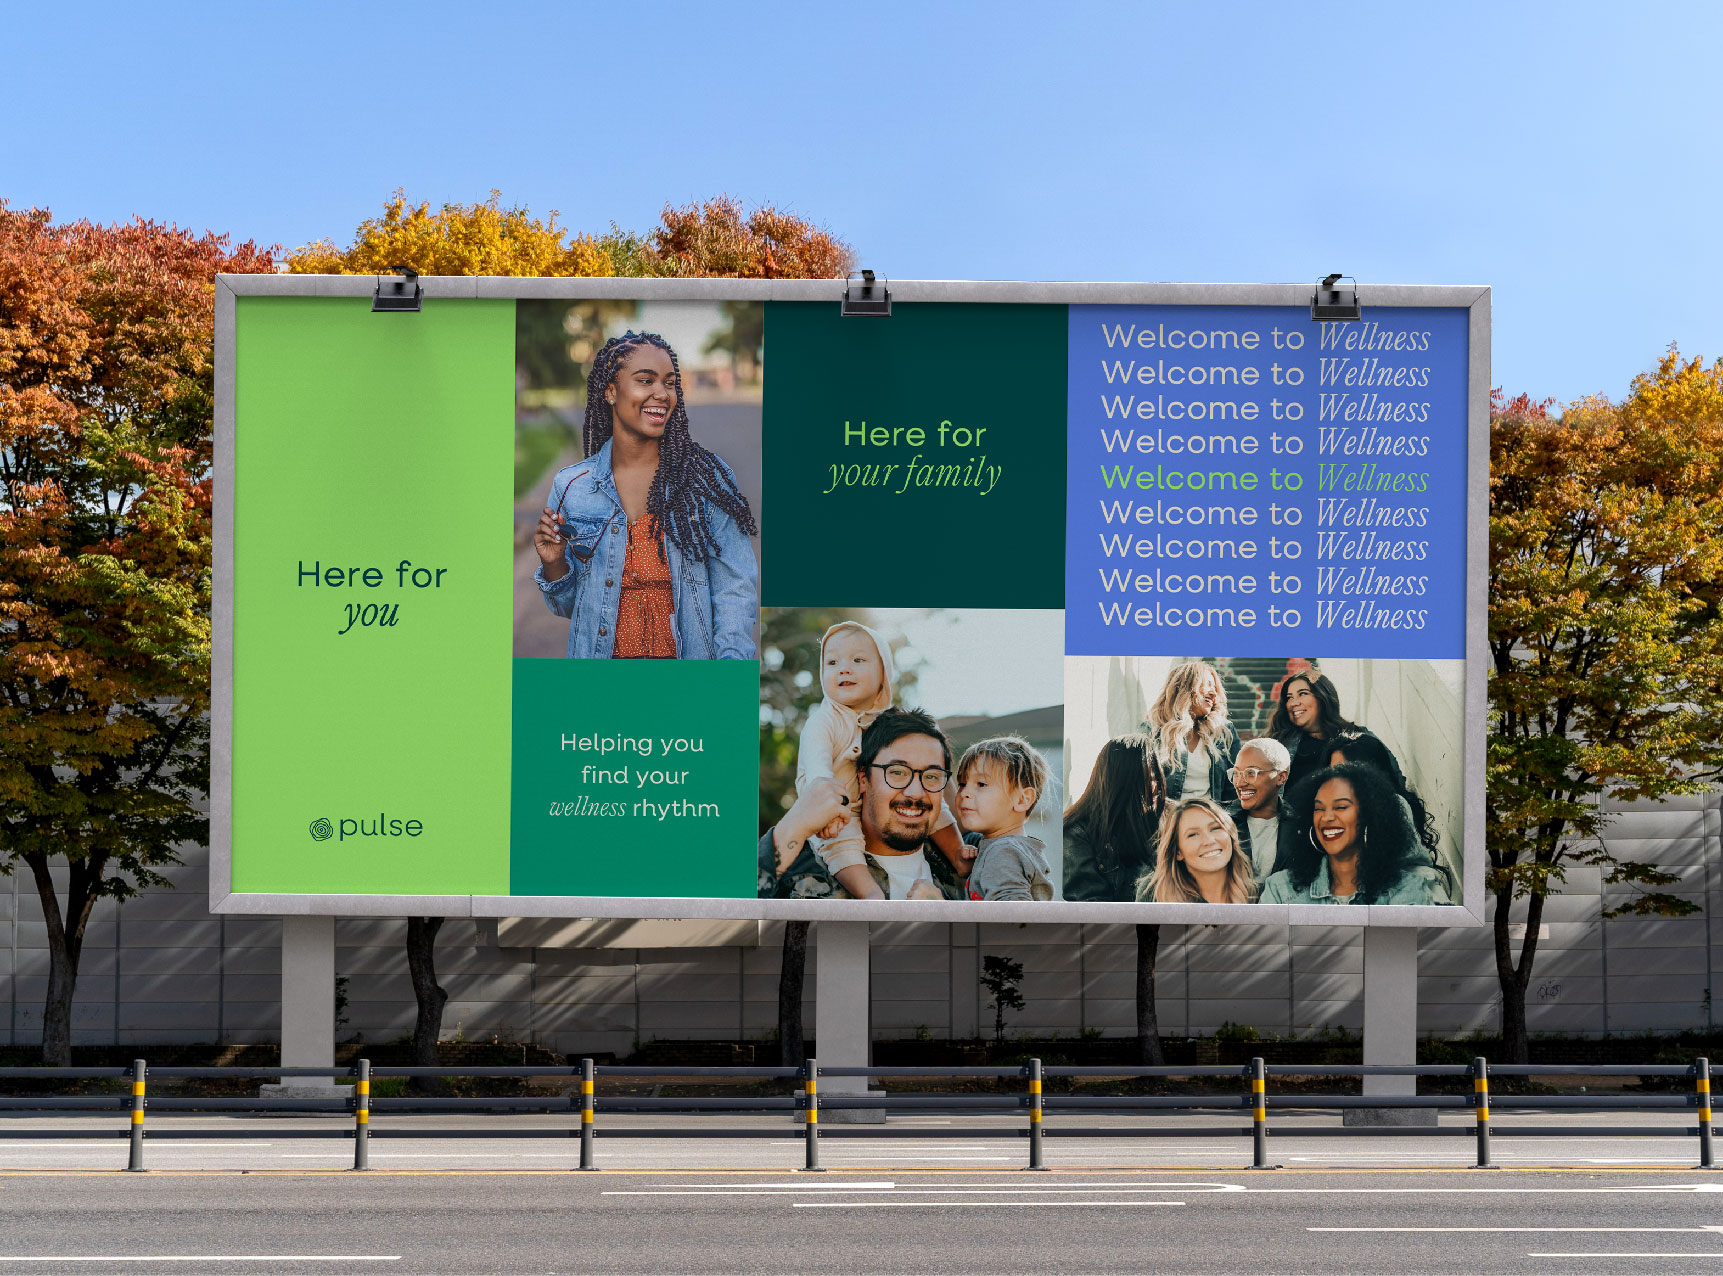 mockup of a billboard showing a collection of the pulse wellness
						brand advertising